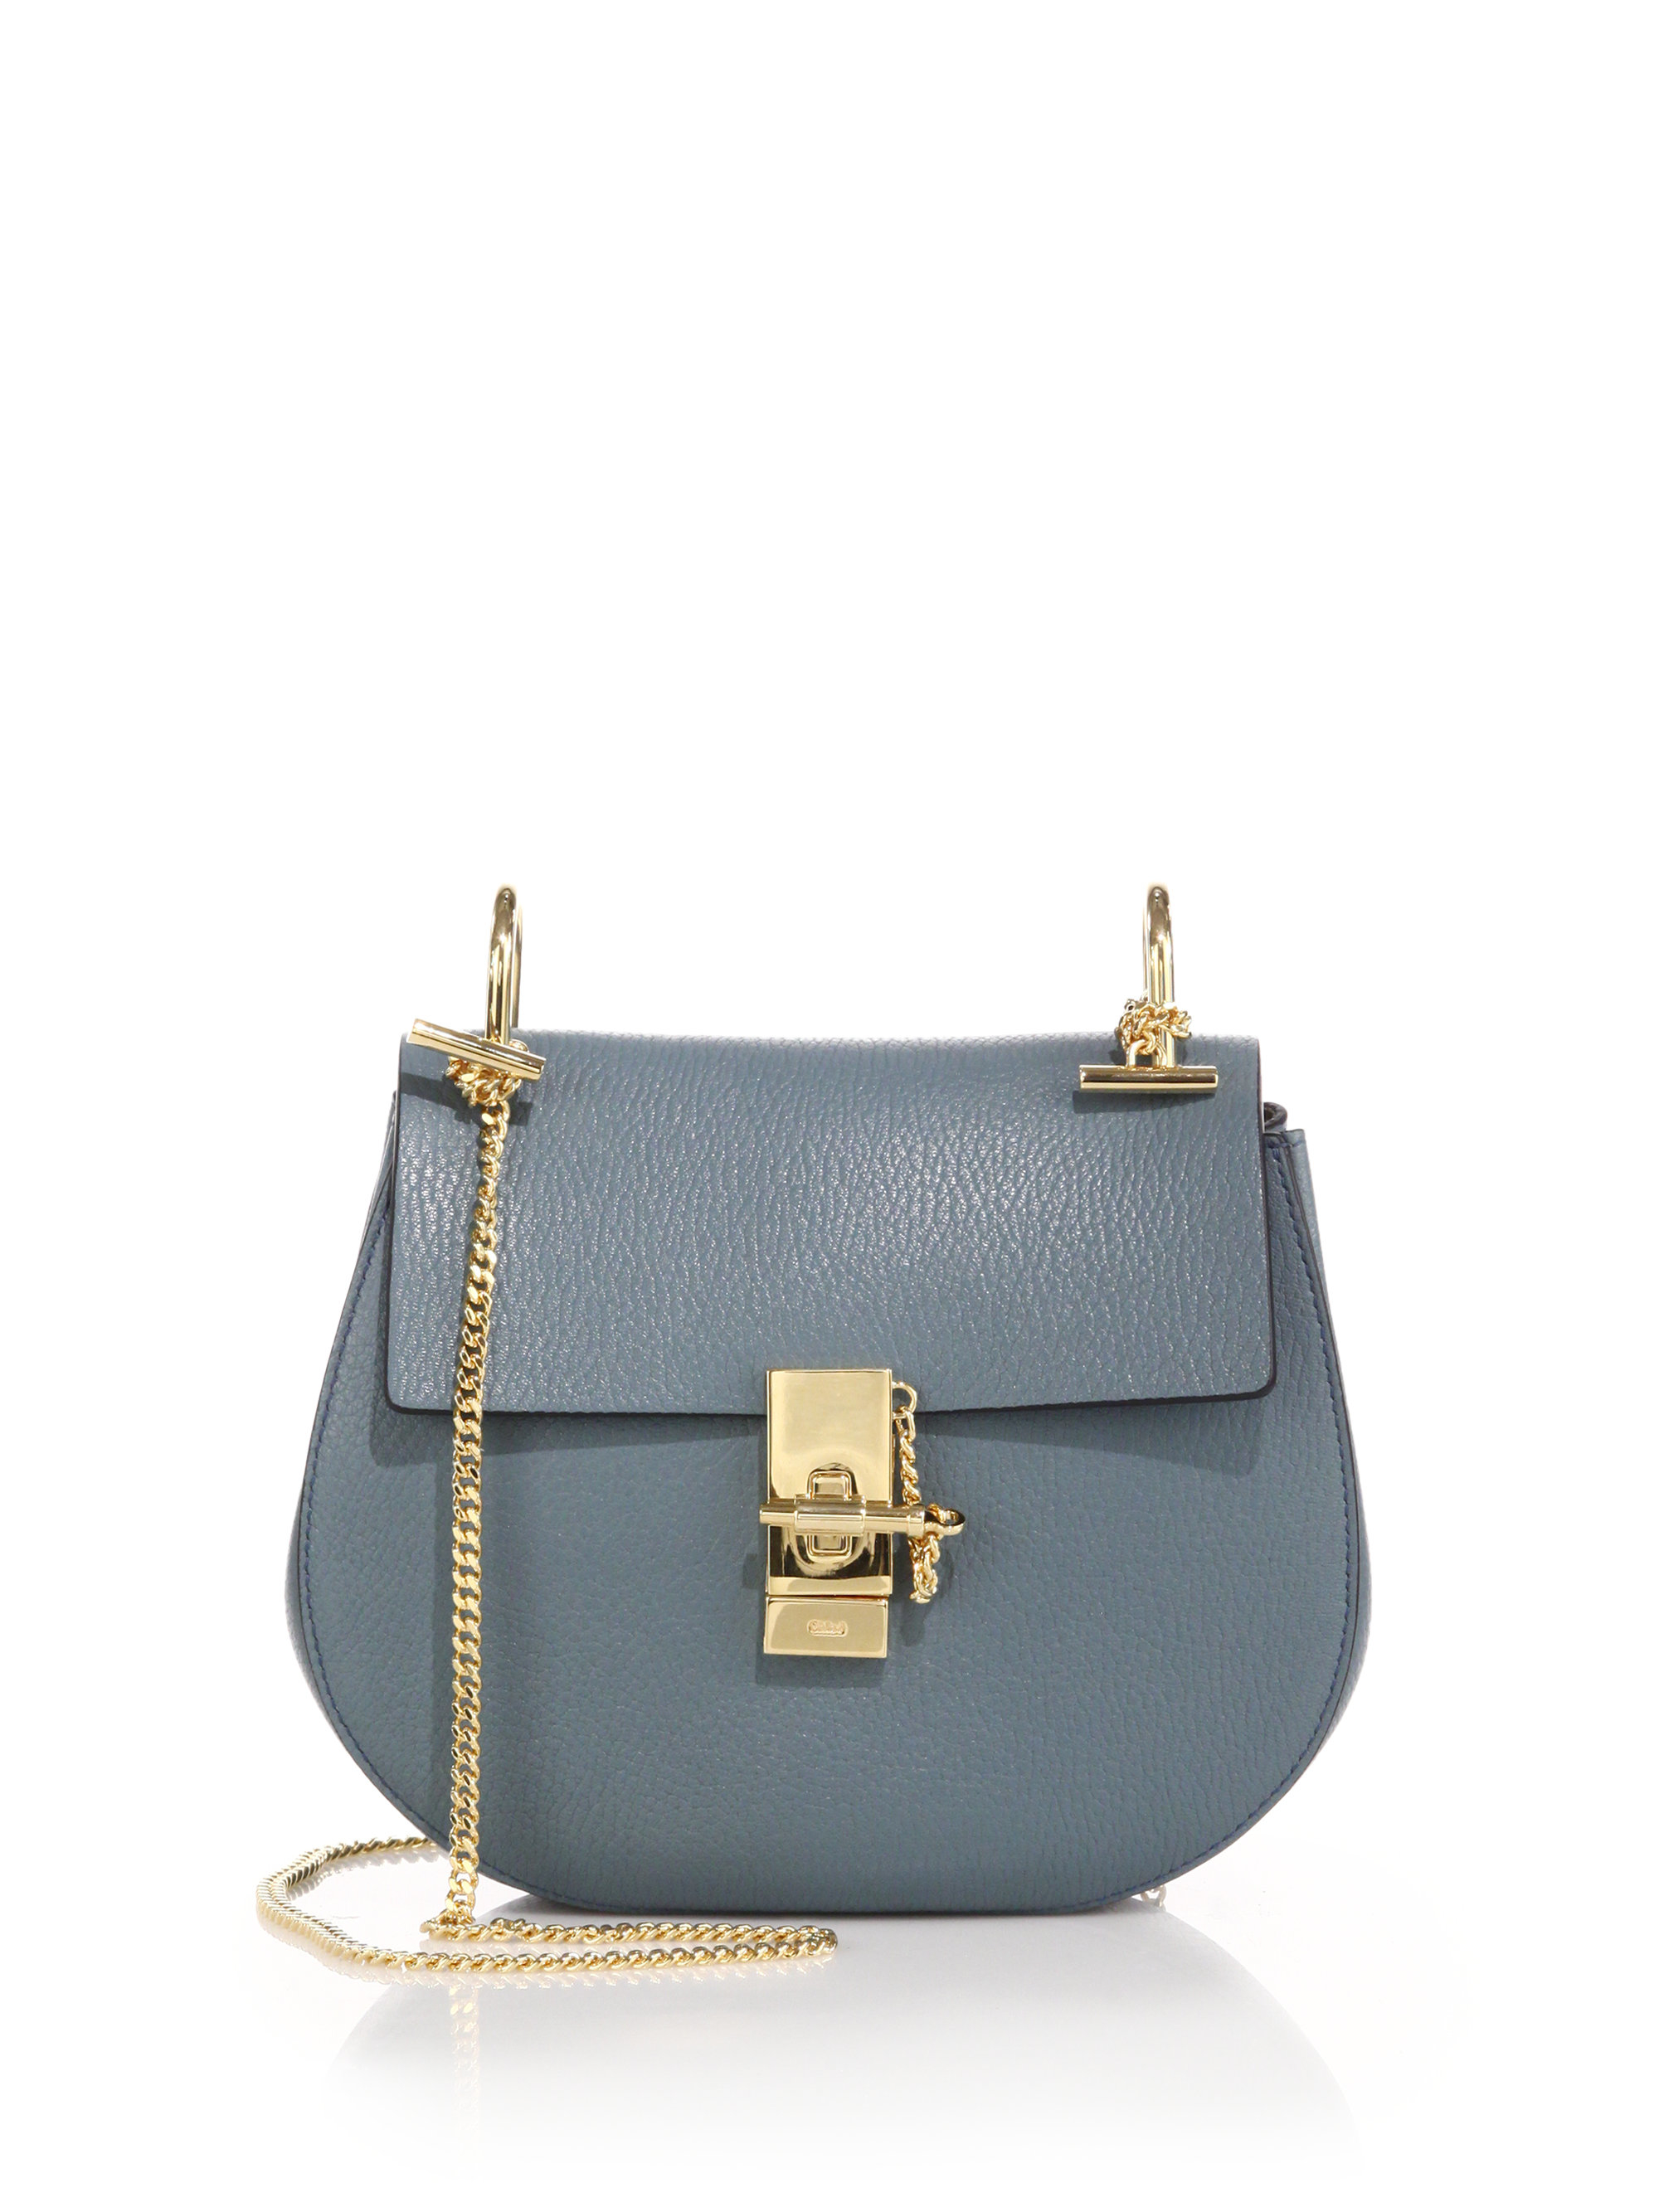 Chlo Drew Small Leather Shoulder Bag in Blue (cloudy blue) | Lyst